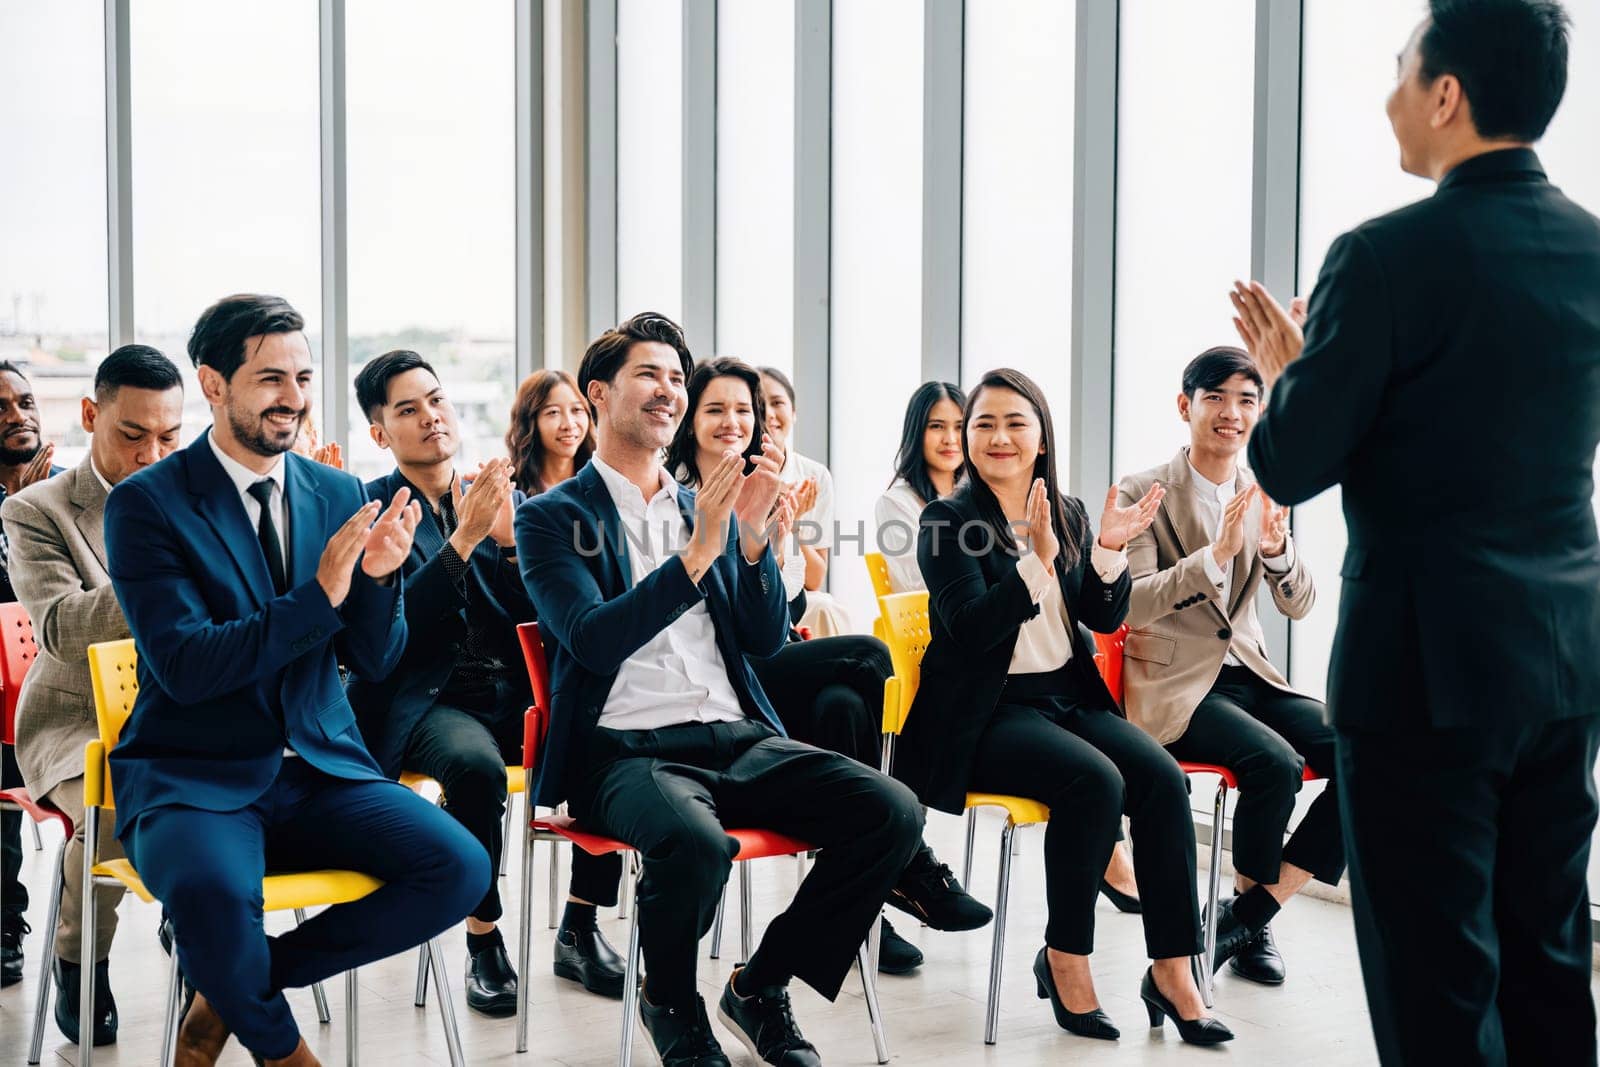 Teamwork triumph Business colleagues applaud and cheer in an office space, celebrating the success of a new product. Clapping hands signify unity, motivation, and shared achievements. by Sorapop